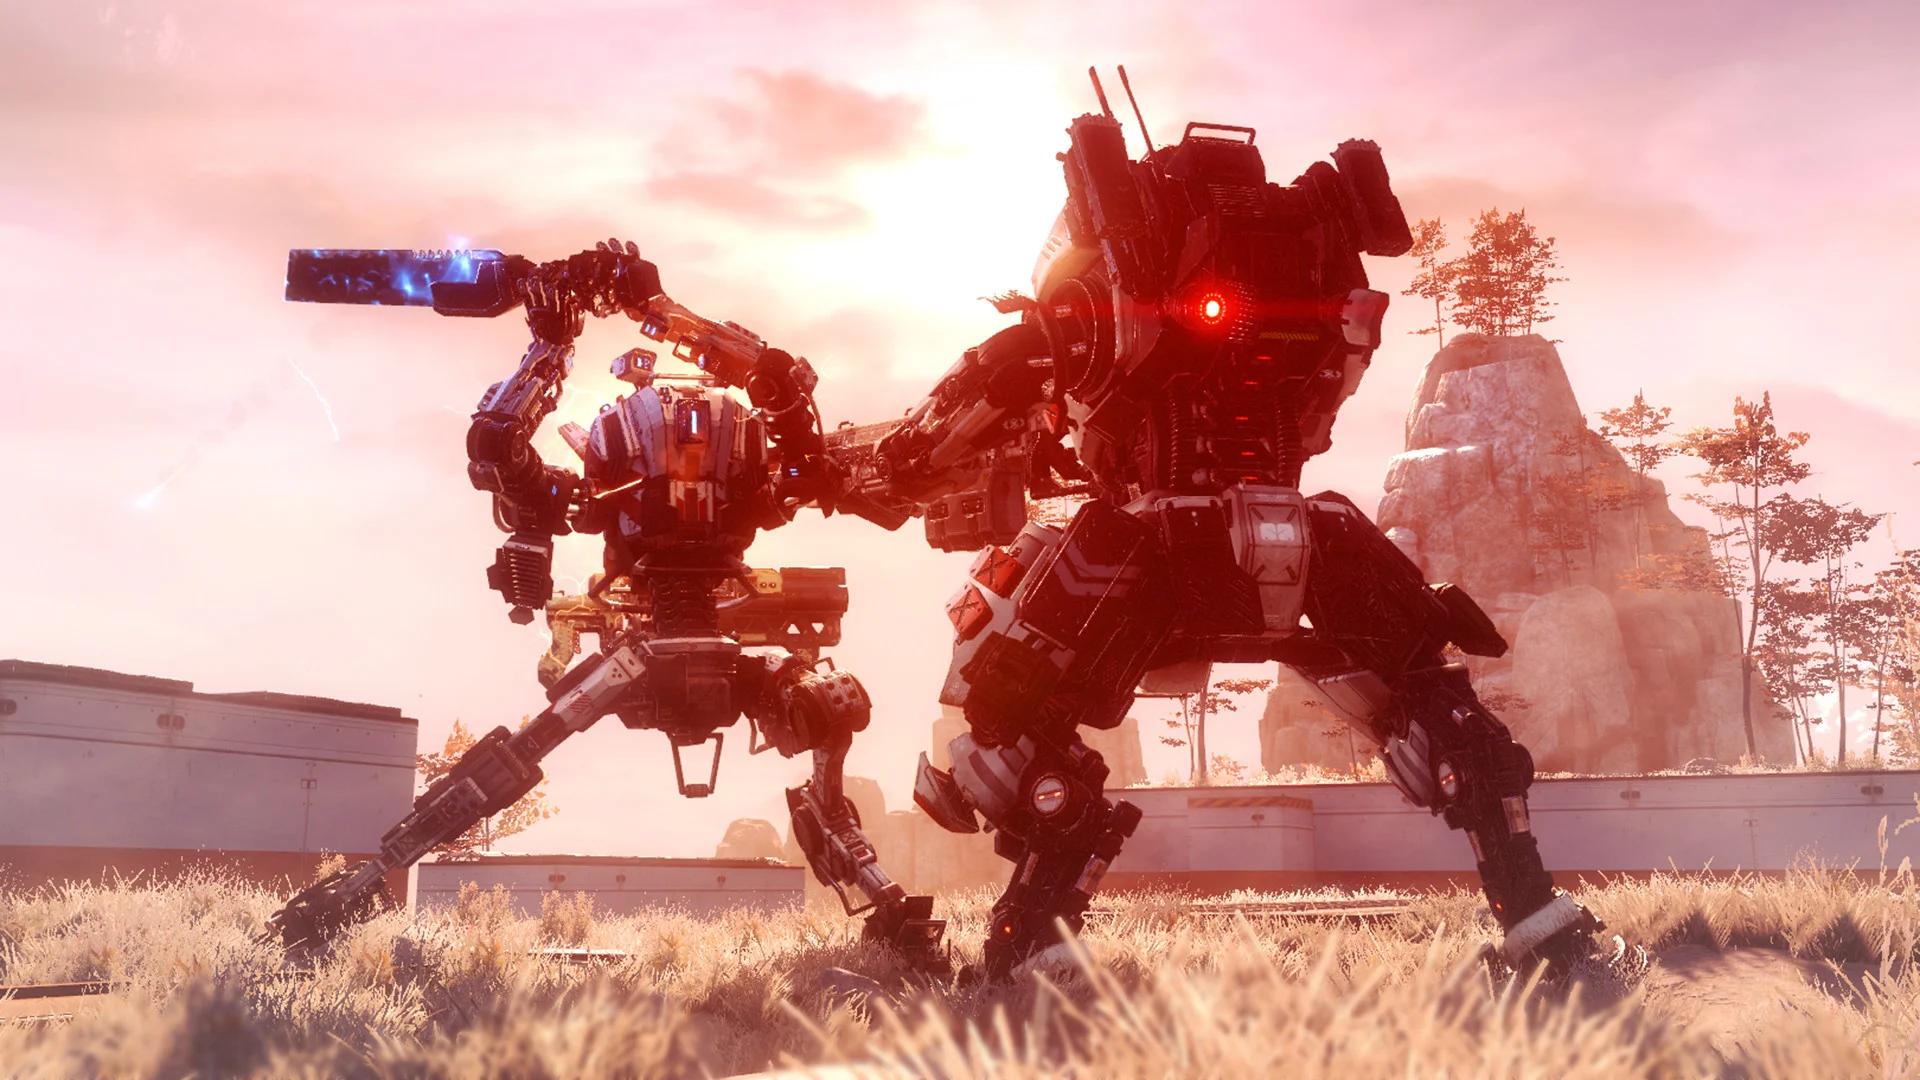 Two Titans battle in the Respawn title Titanfall 2.